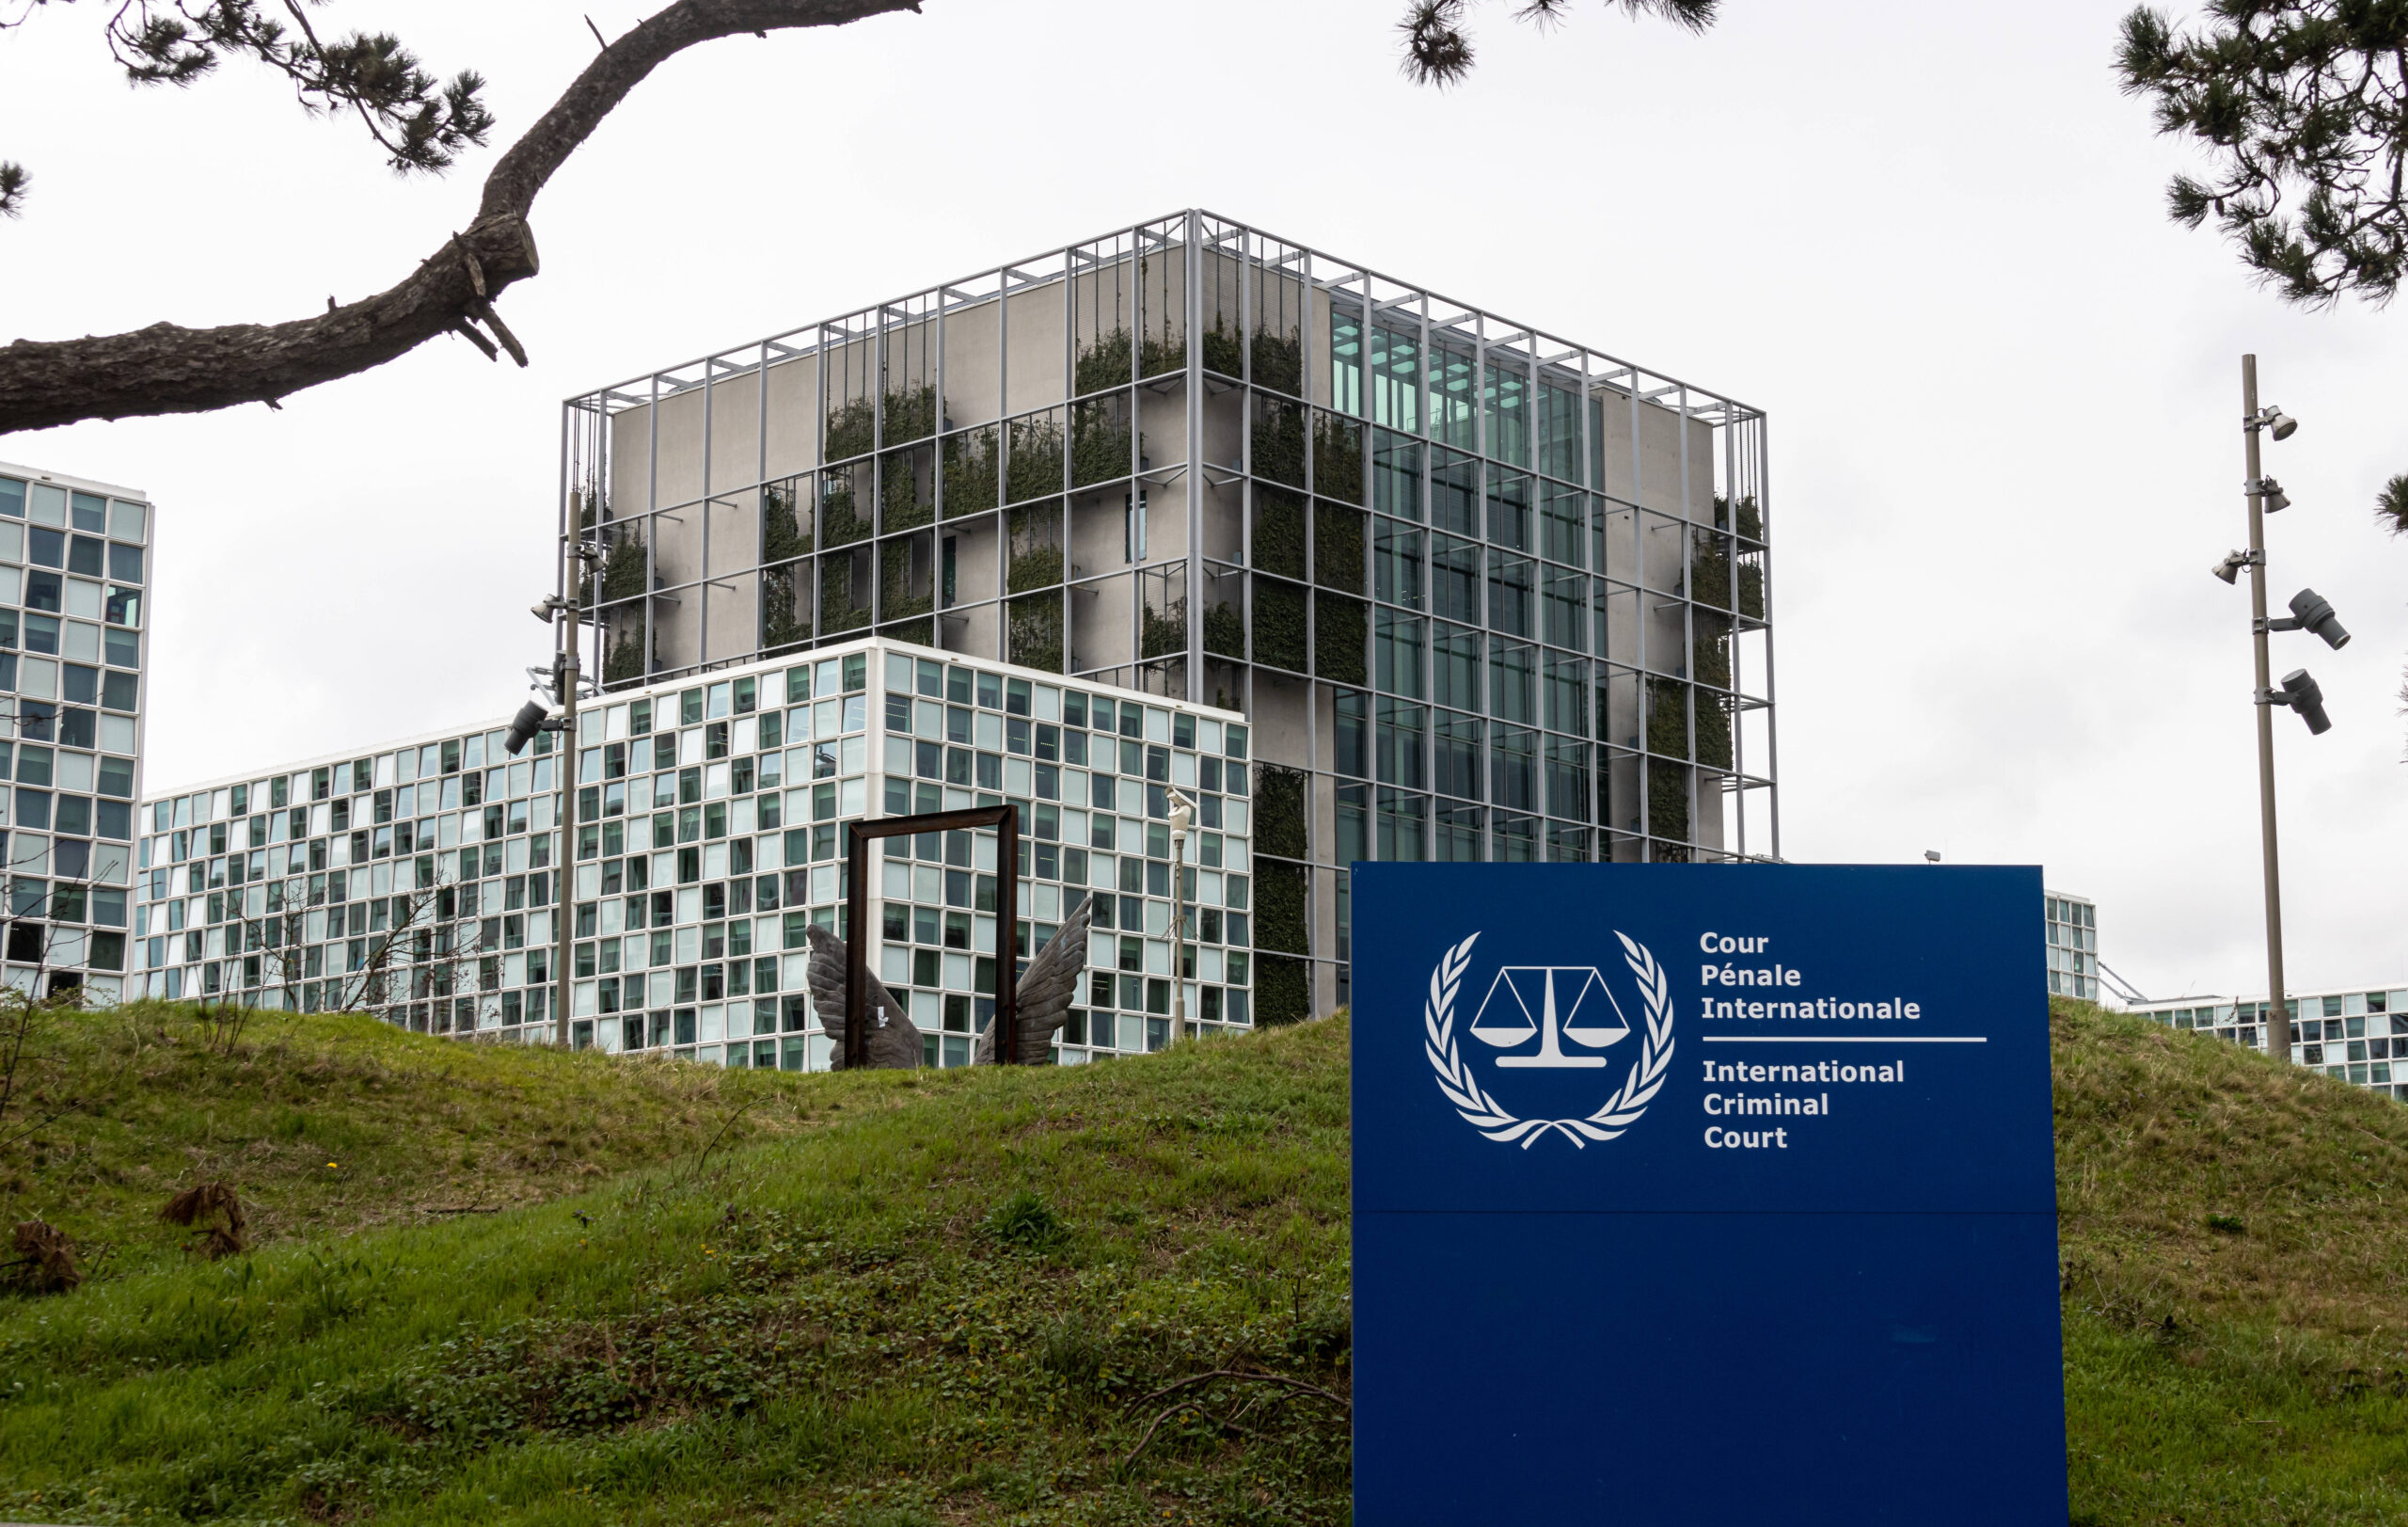 The exterior of the building of the International Criminal Court in The Hague